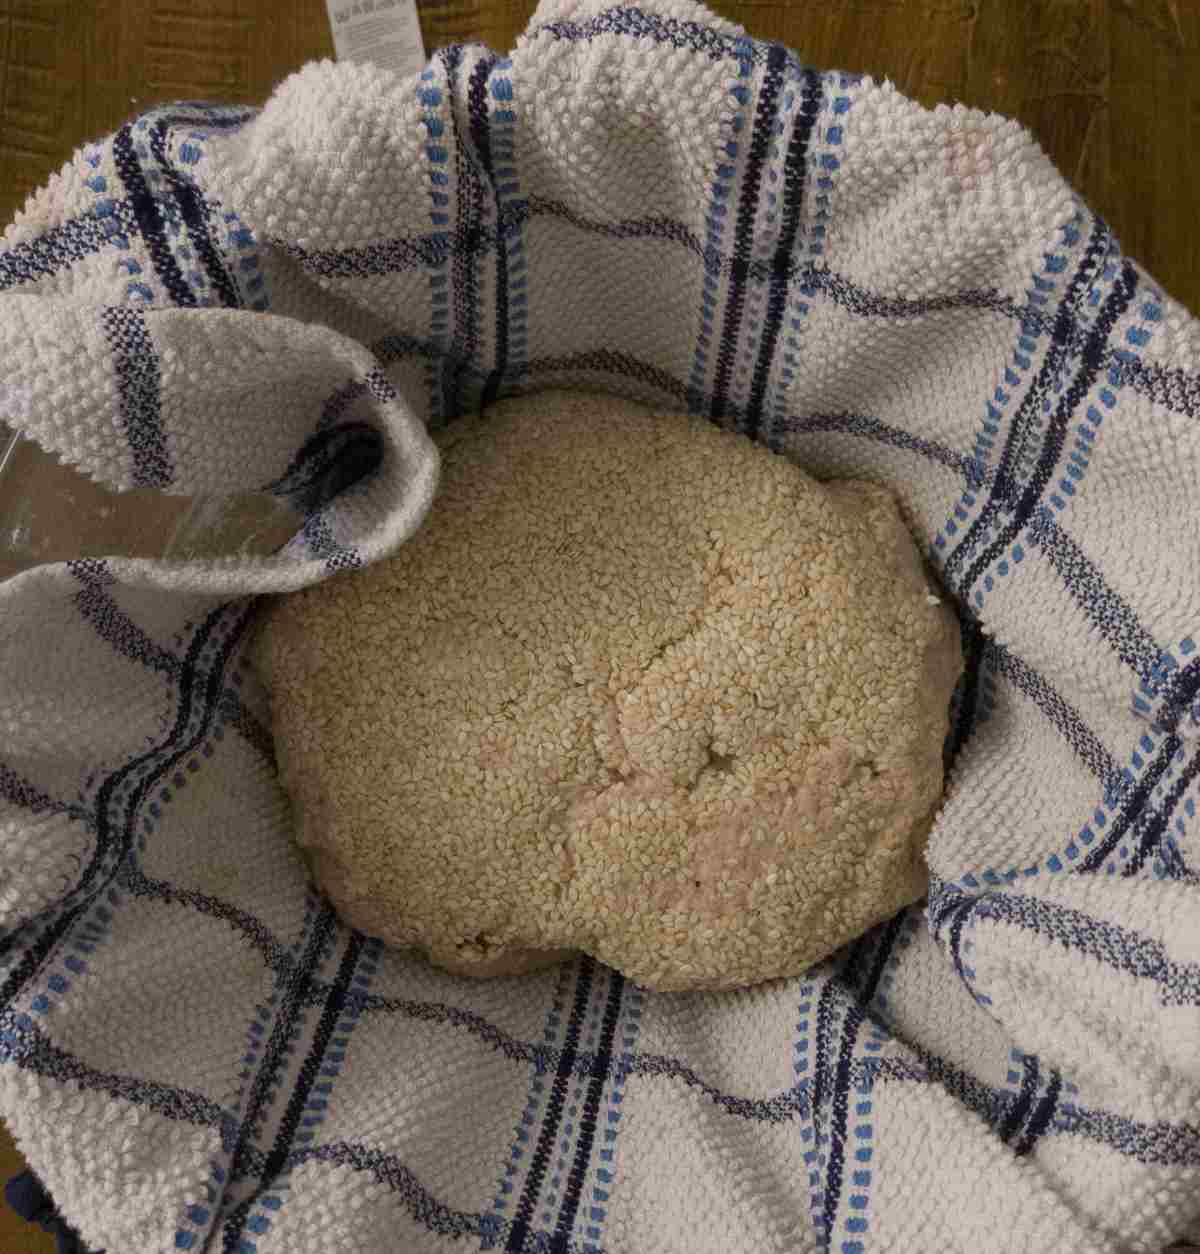 Shaped dough in a bowl lined with a towel.